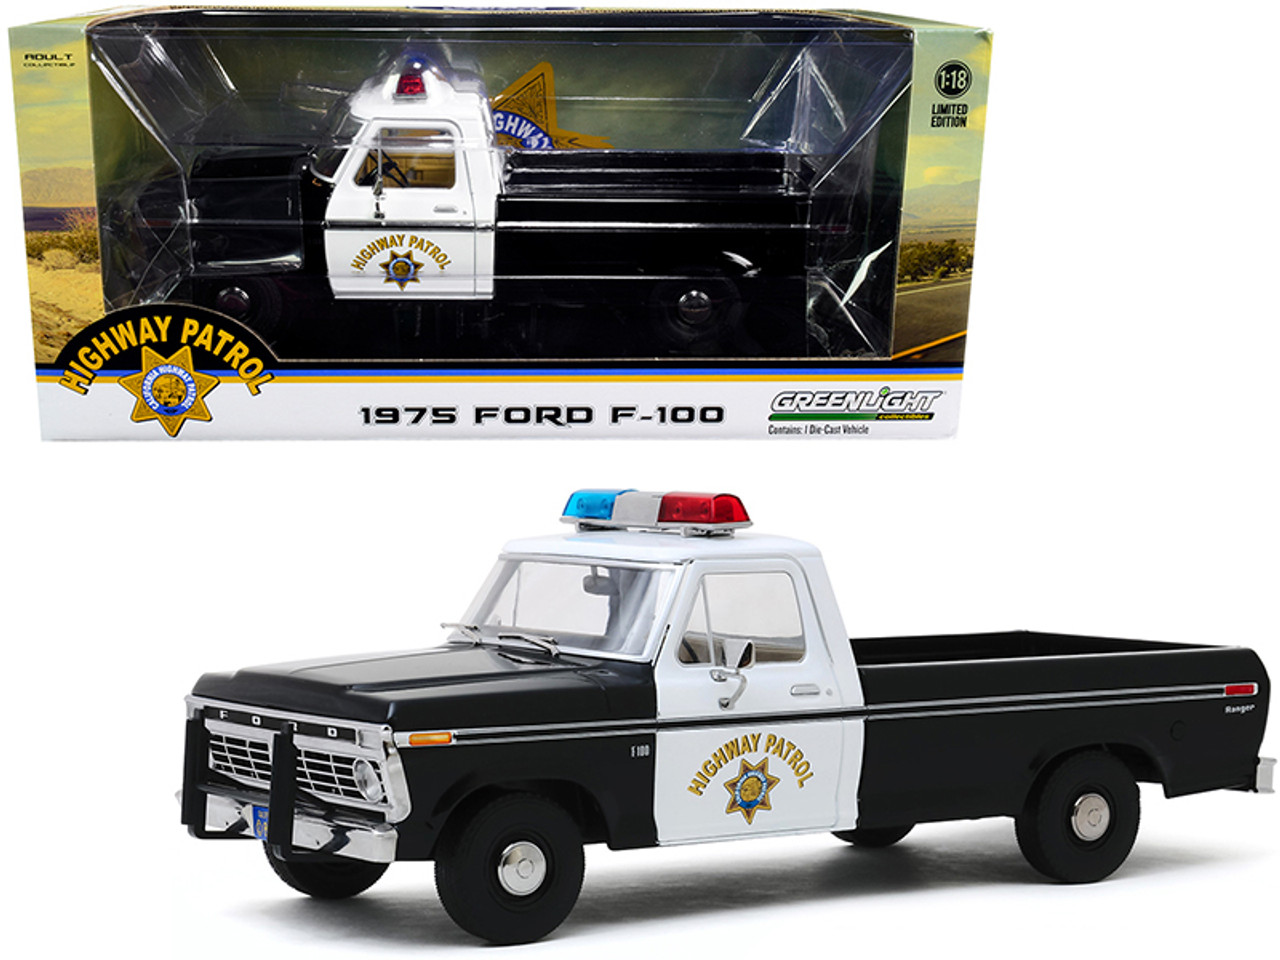 1975 Ford F-100 Pickup Truck "California Highway Patrol" (CHP) Black and White 1/18 Diecast Model Car by Greenlight